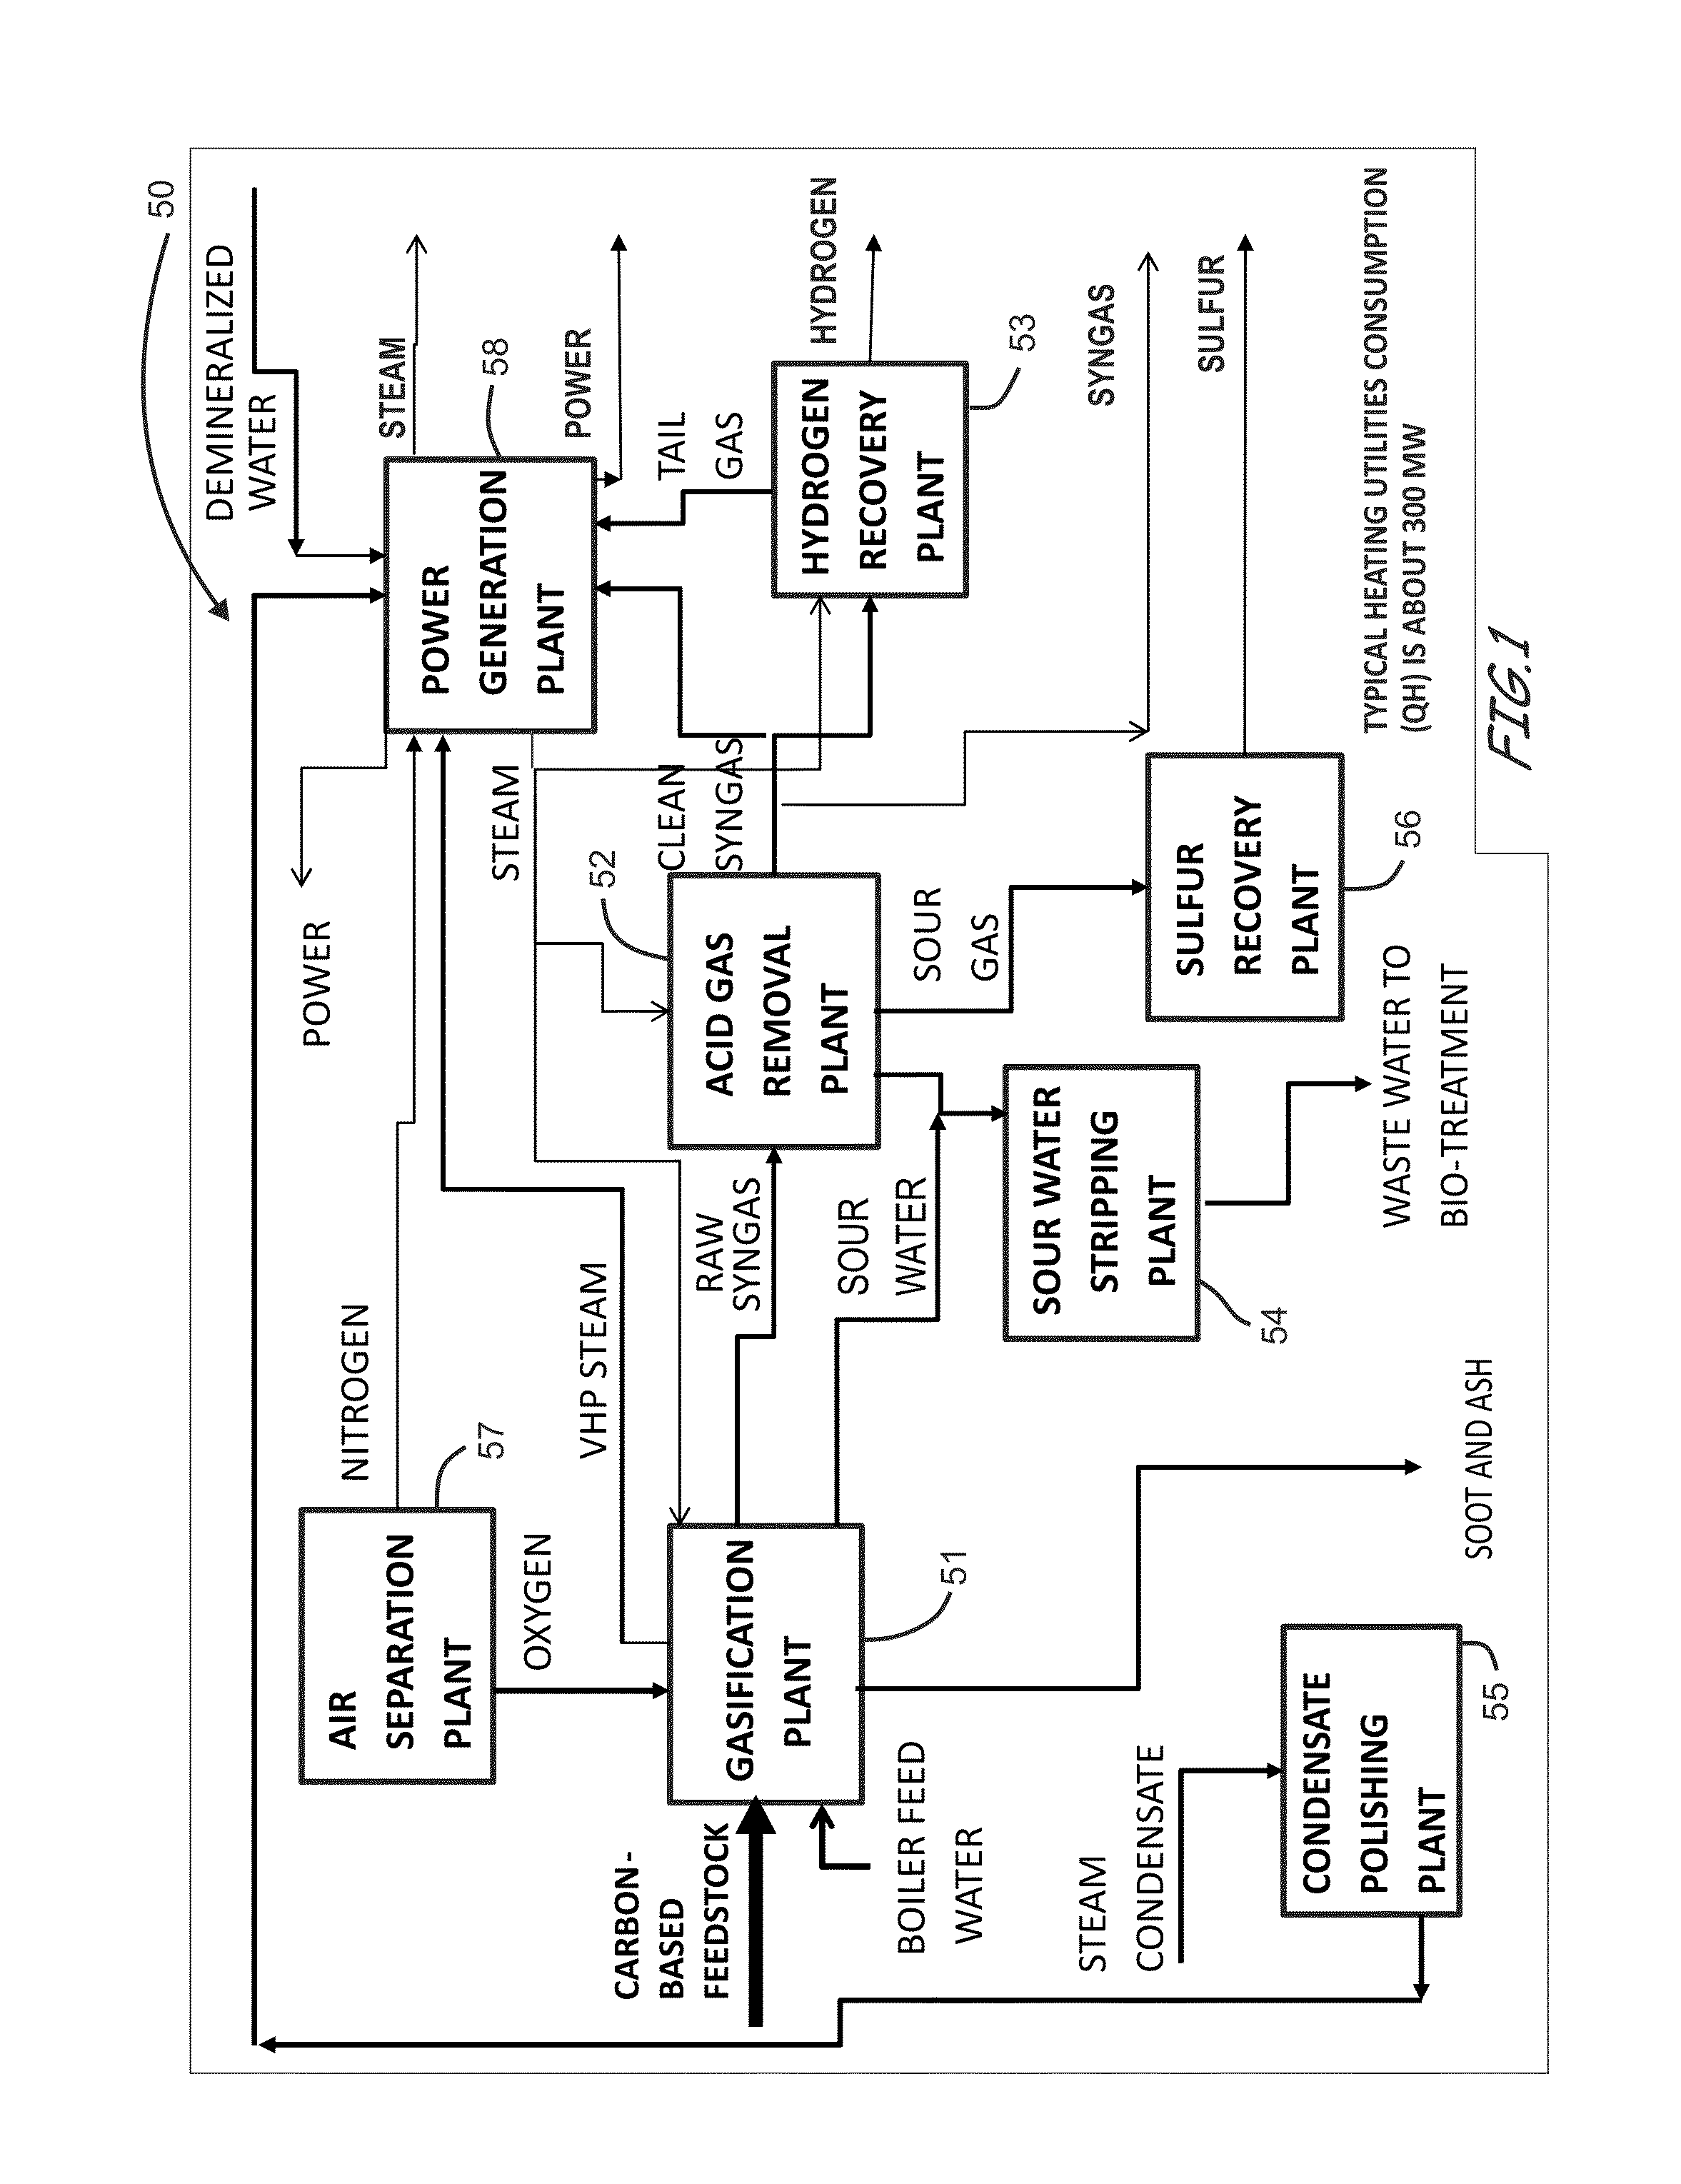 Energy efficient gasification based multi generation apparatus employing energy efficient gasification plant-directed process schemes and related methods